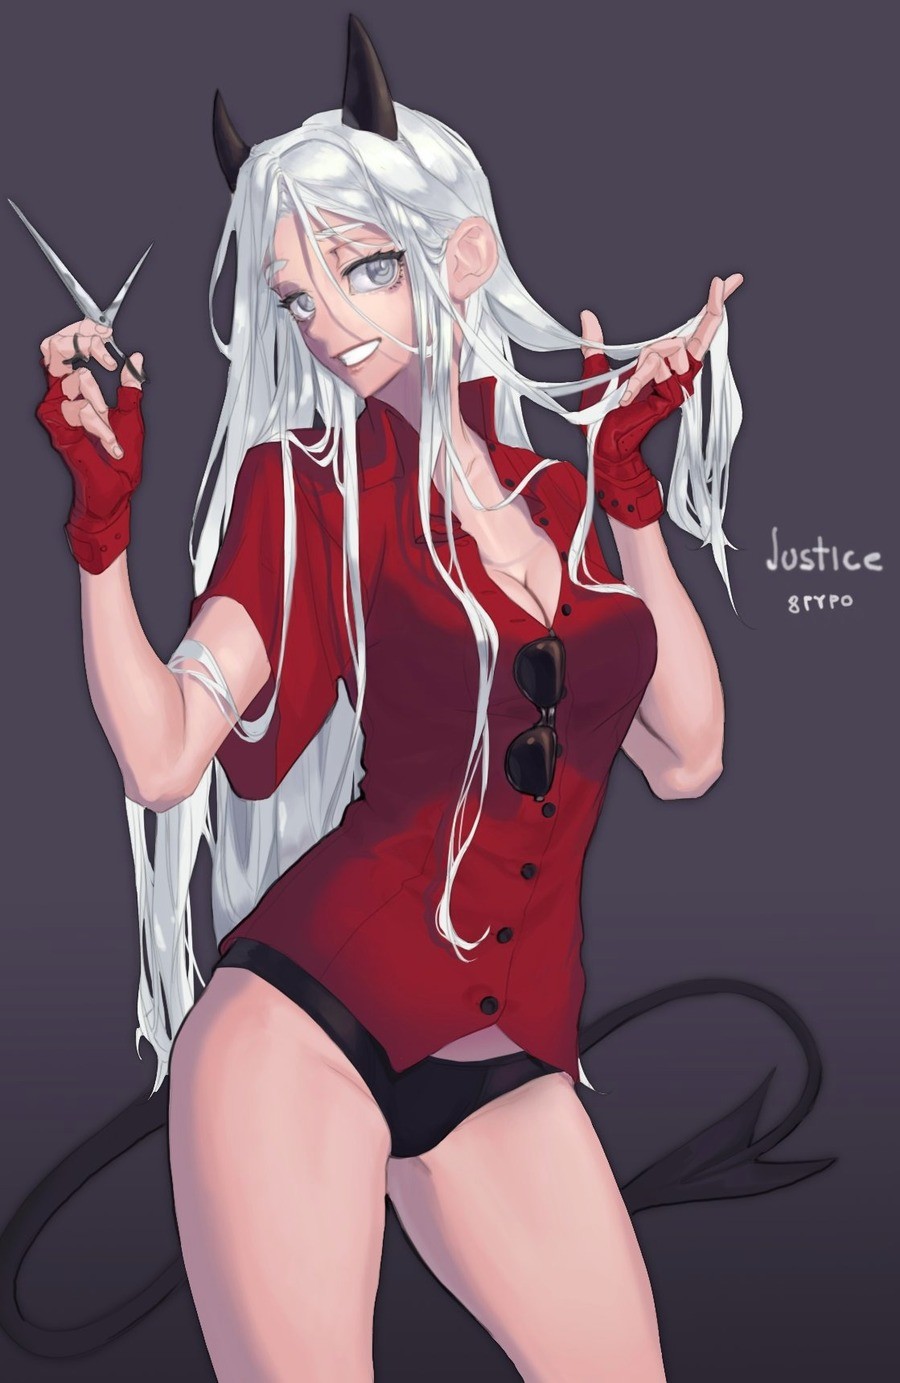 Daily Demon Harem 303: Justice!. Hope you all had an AWESOME day today! Source: join list: DailyDemonHarem (194 subs)Mention Clicks: 38148Msgs Sent: 50296Mentio